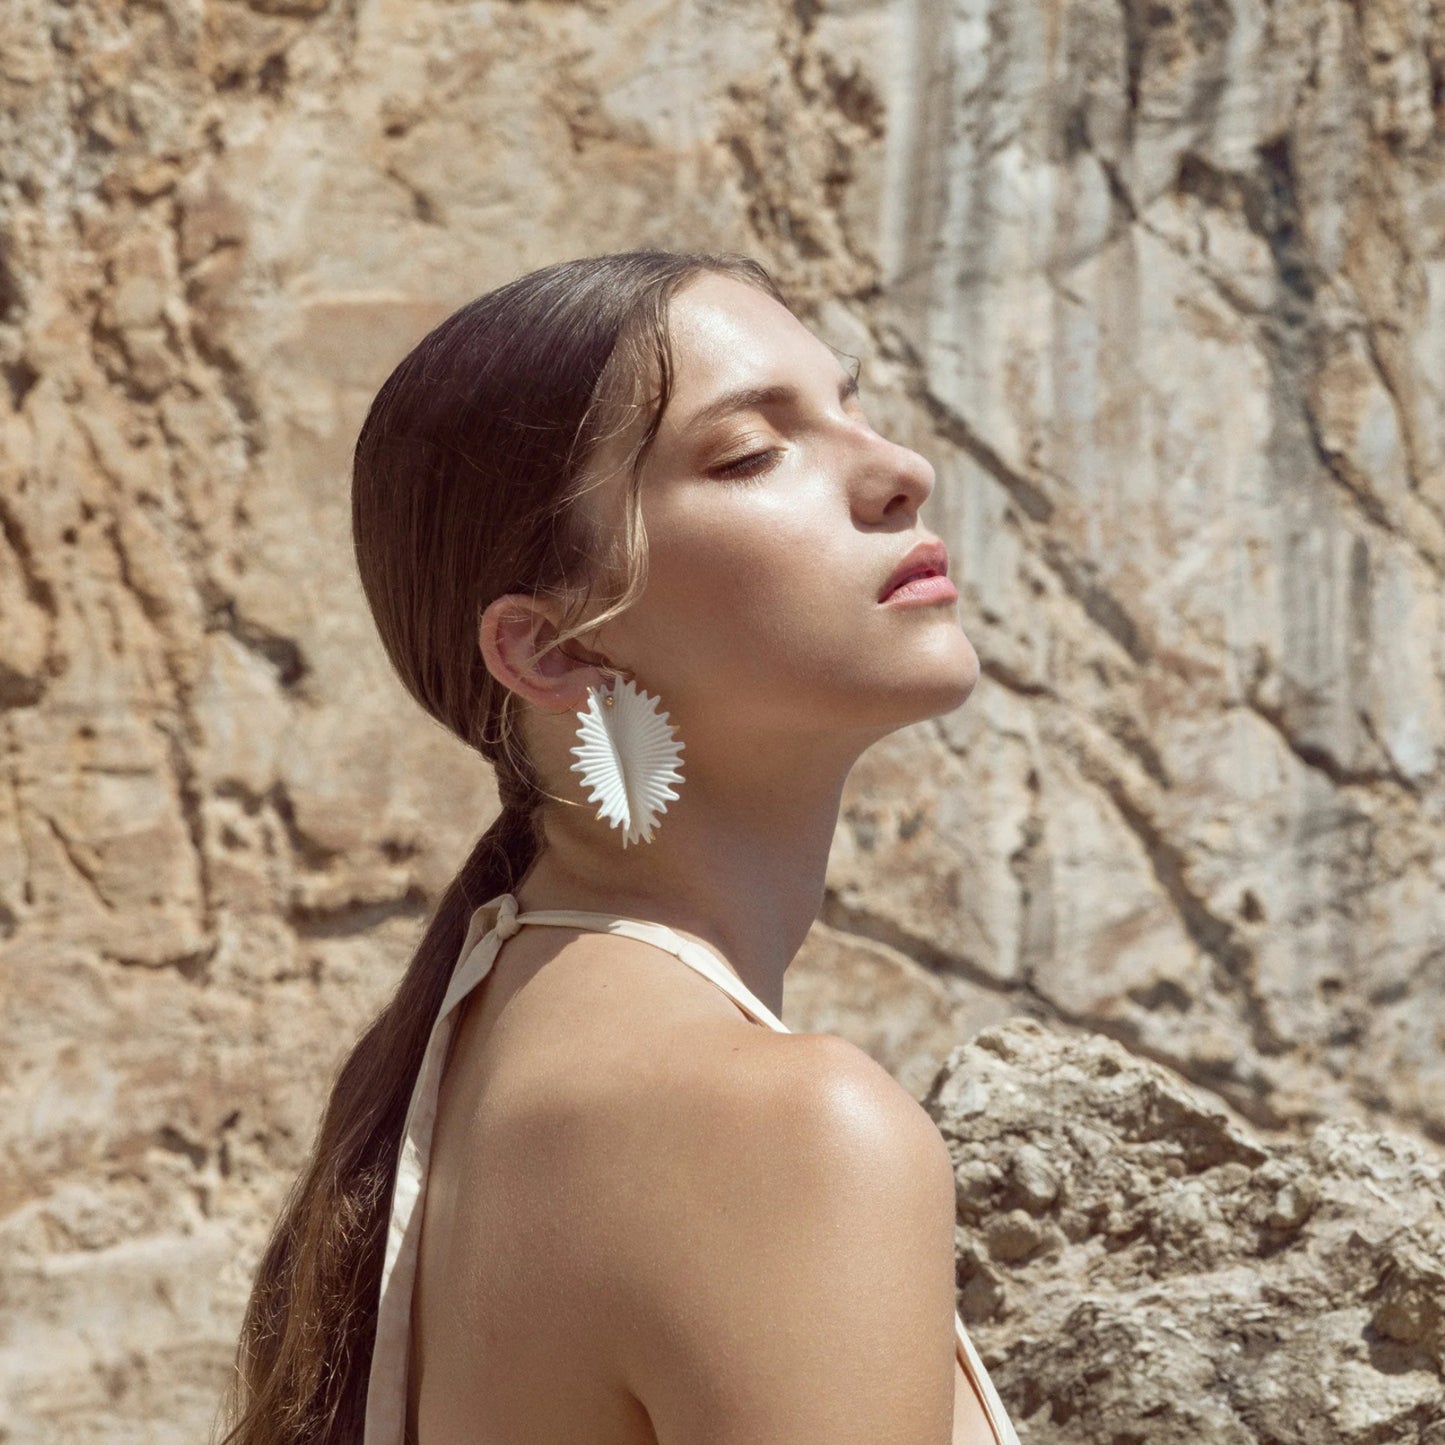 Lladró Jewelry: Actinia Big Earring. White and Golden luster.